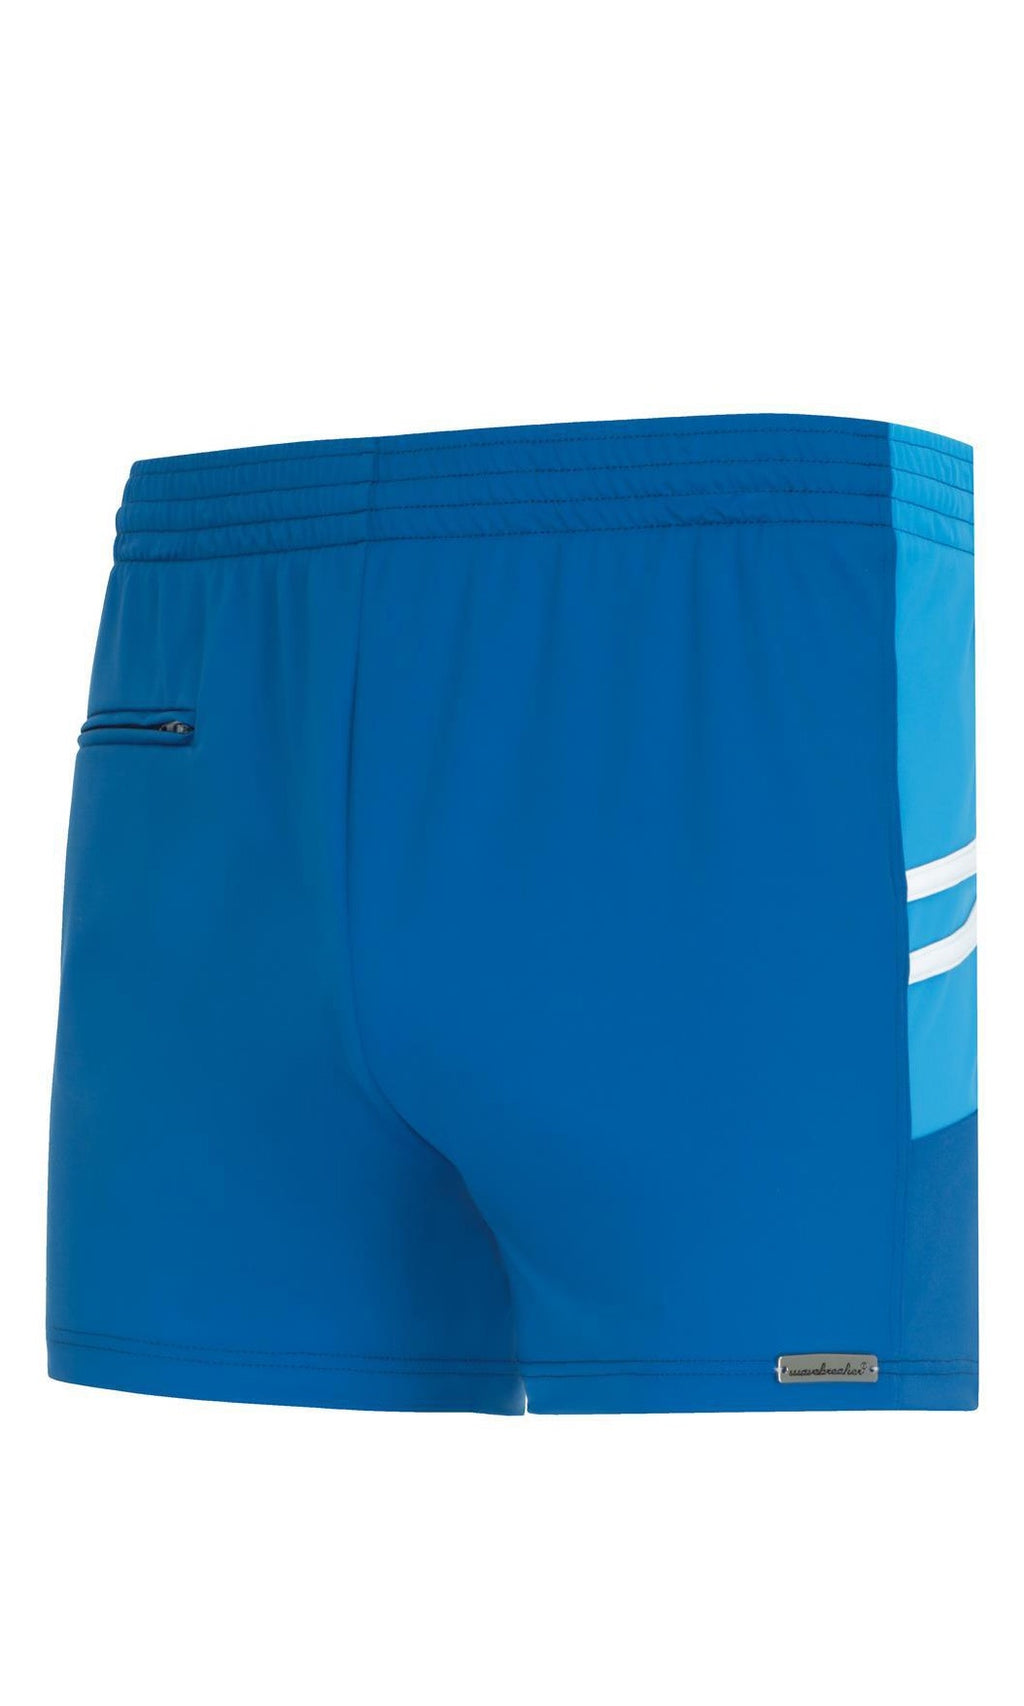 Classic Blues Trunks, More Colours, Special Order S - 2XL